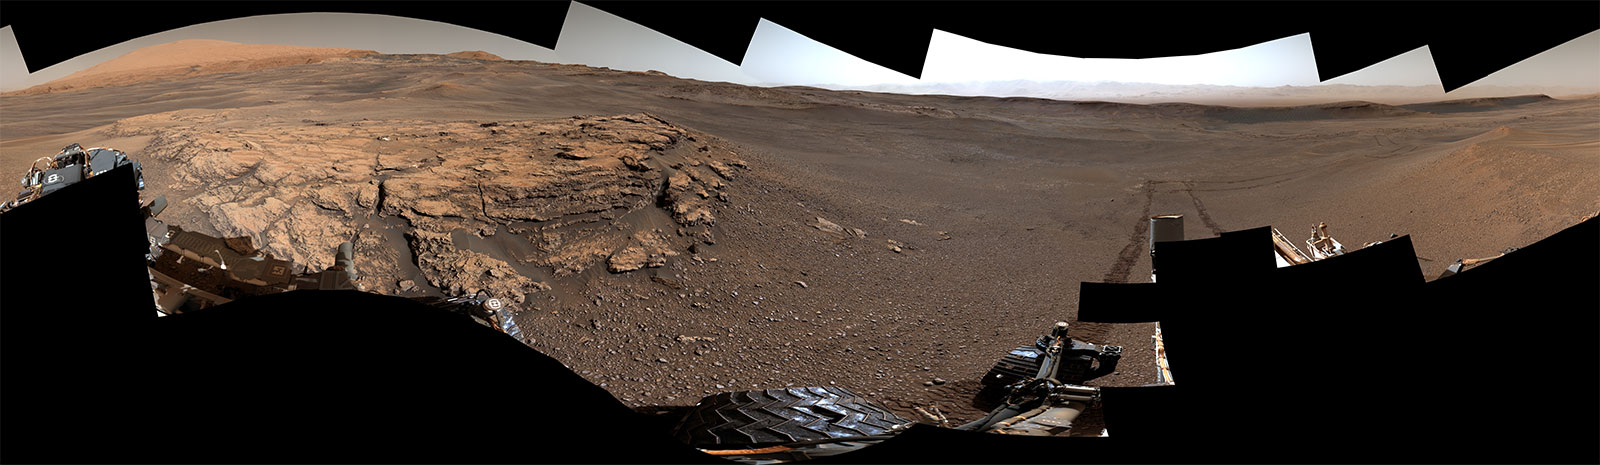 Curiosity captured this 360-degree panorama of a location on Mars called “Teal Ridge” on June 18, 2019. This location is part of a larger region the rover has been exploring called the “clay-bearing unit” on the side of Mount Sharp, which is inside Gale Crater.